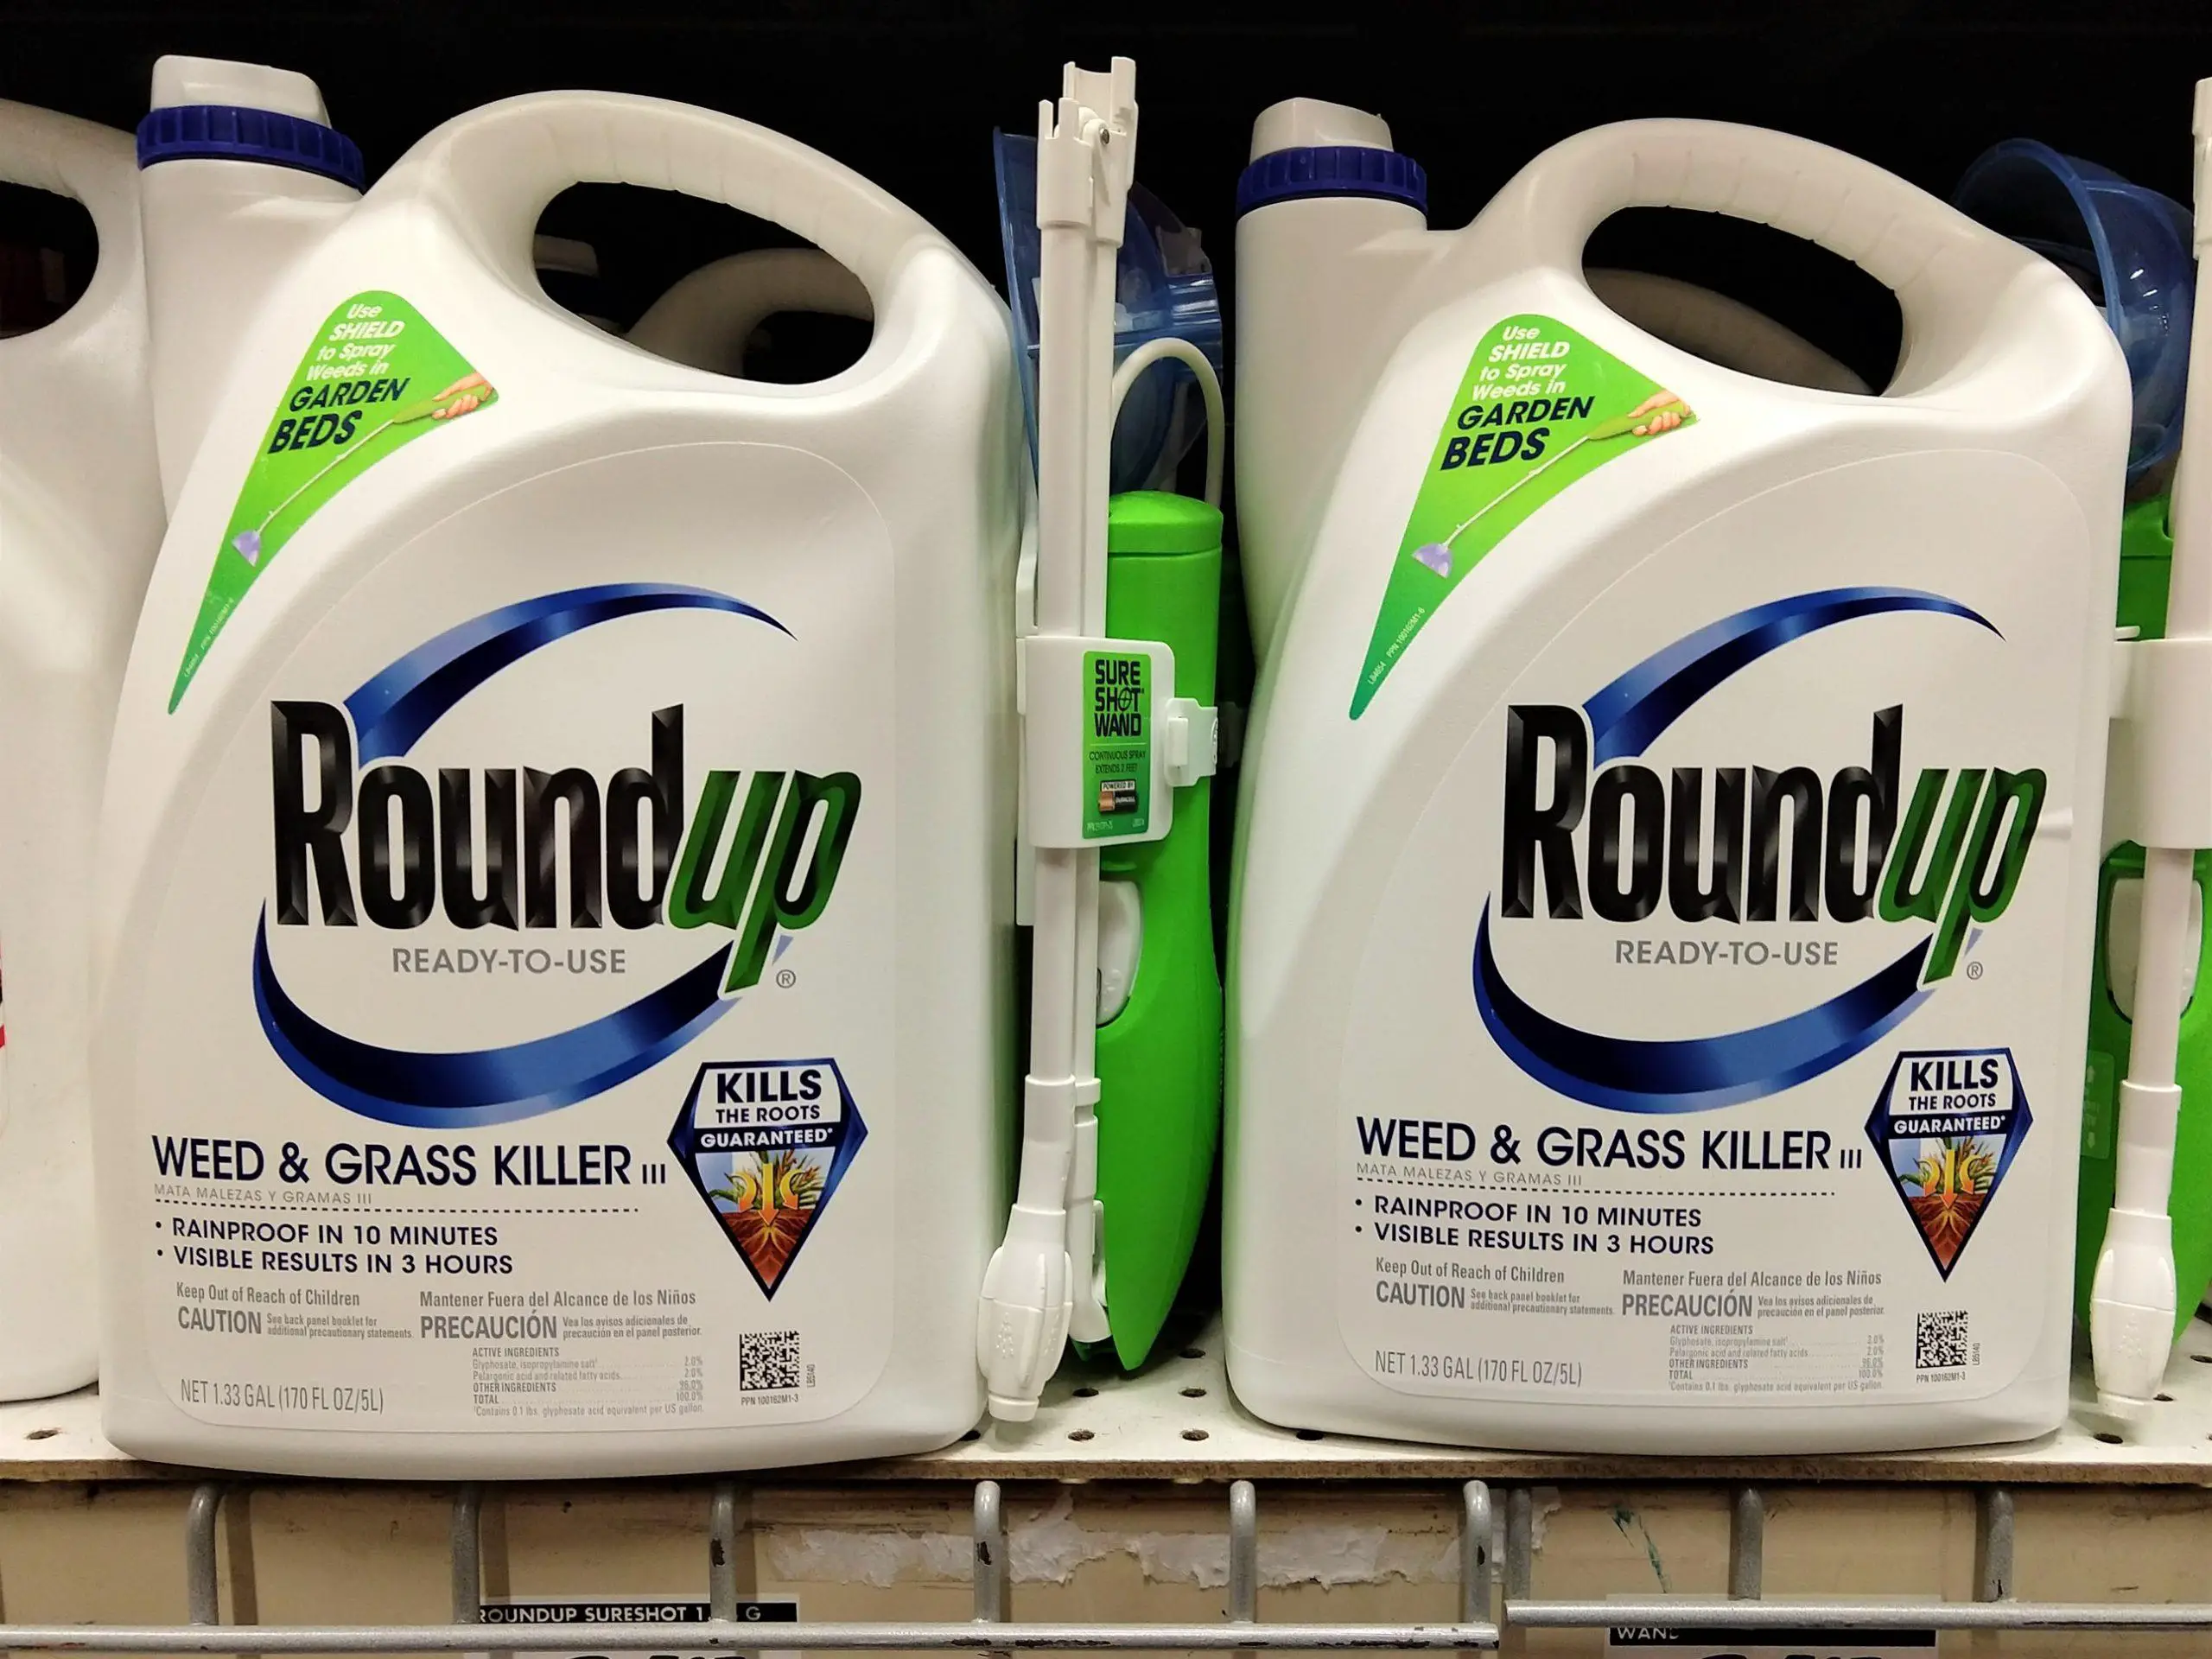 Roundup Glyphosate Weed and Grass Killer